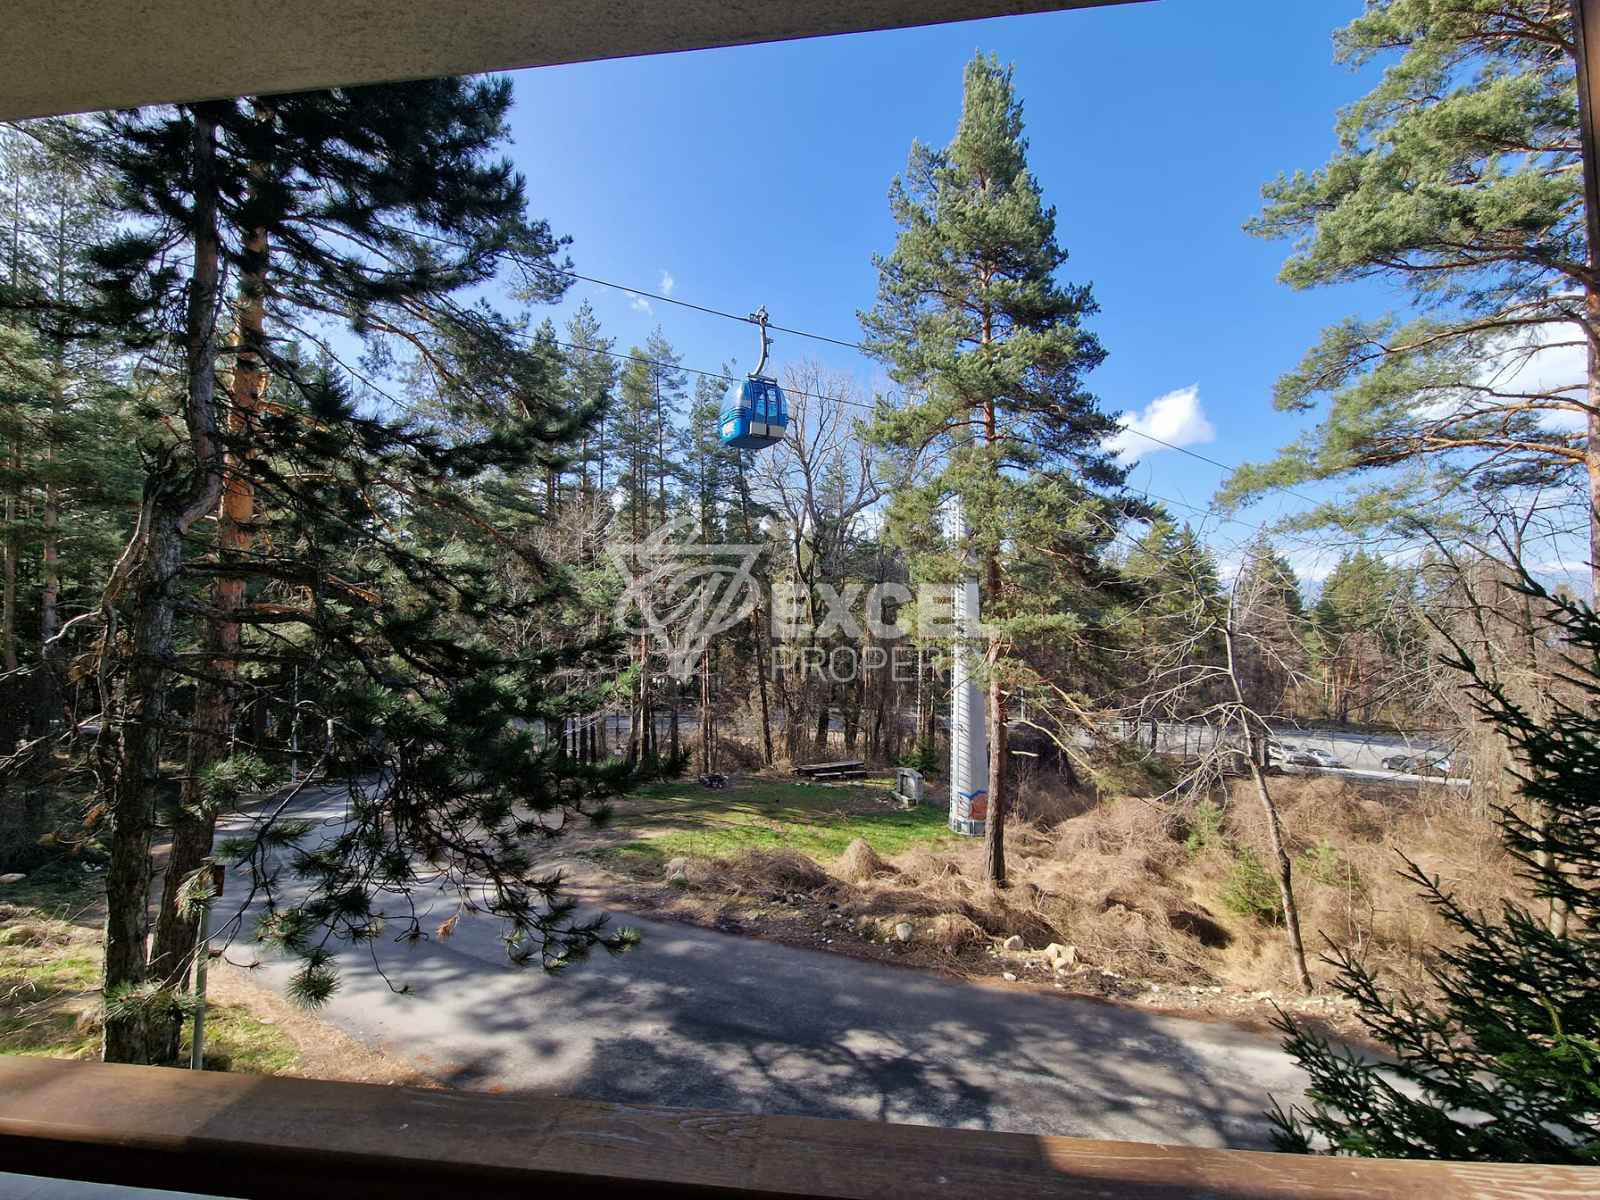 One-bedroom apartment for sale 100m from the ski road! Residential building with a low maintenance fee!